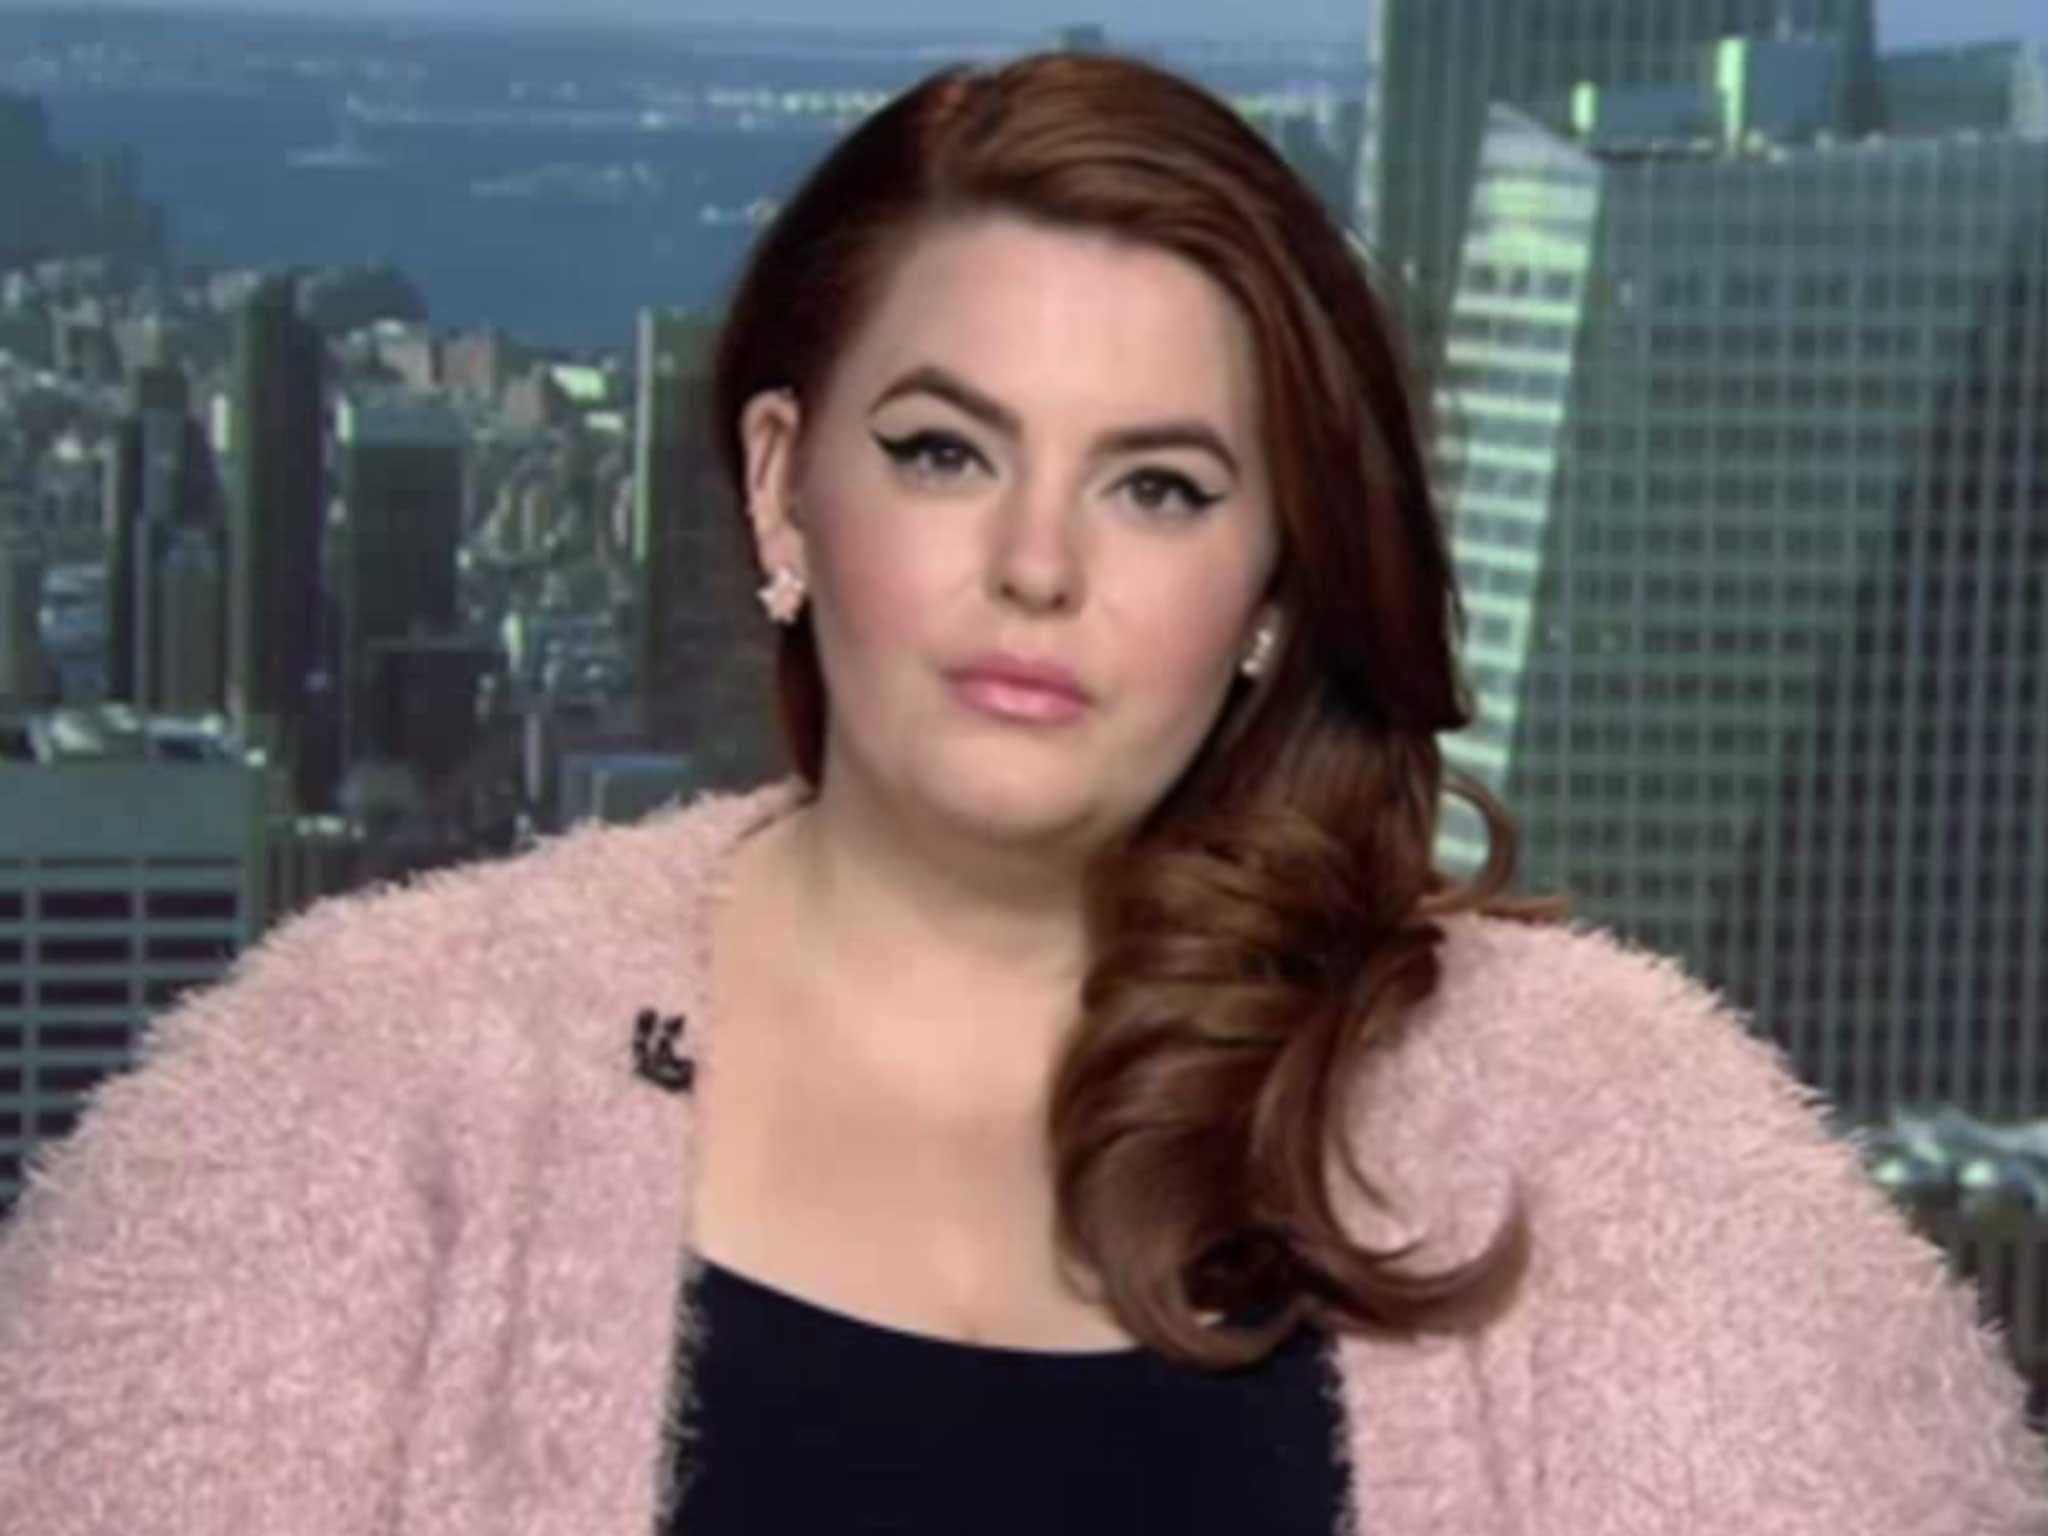 Tess Holliday apologises after saying